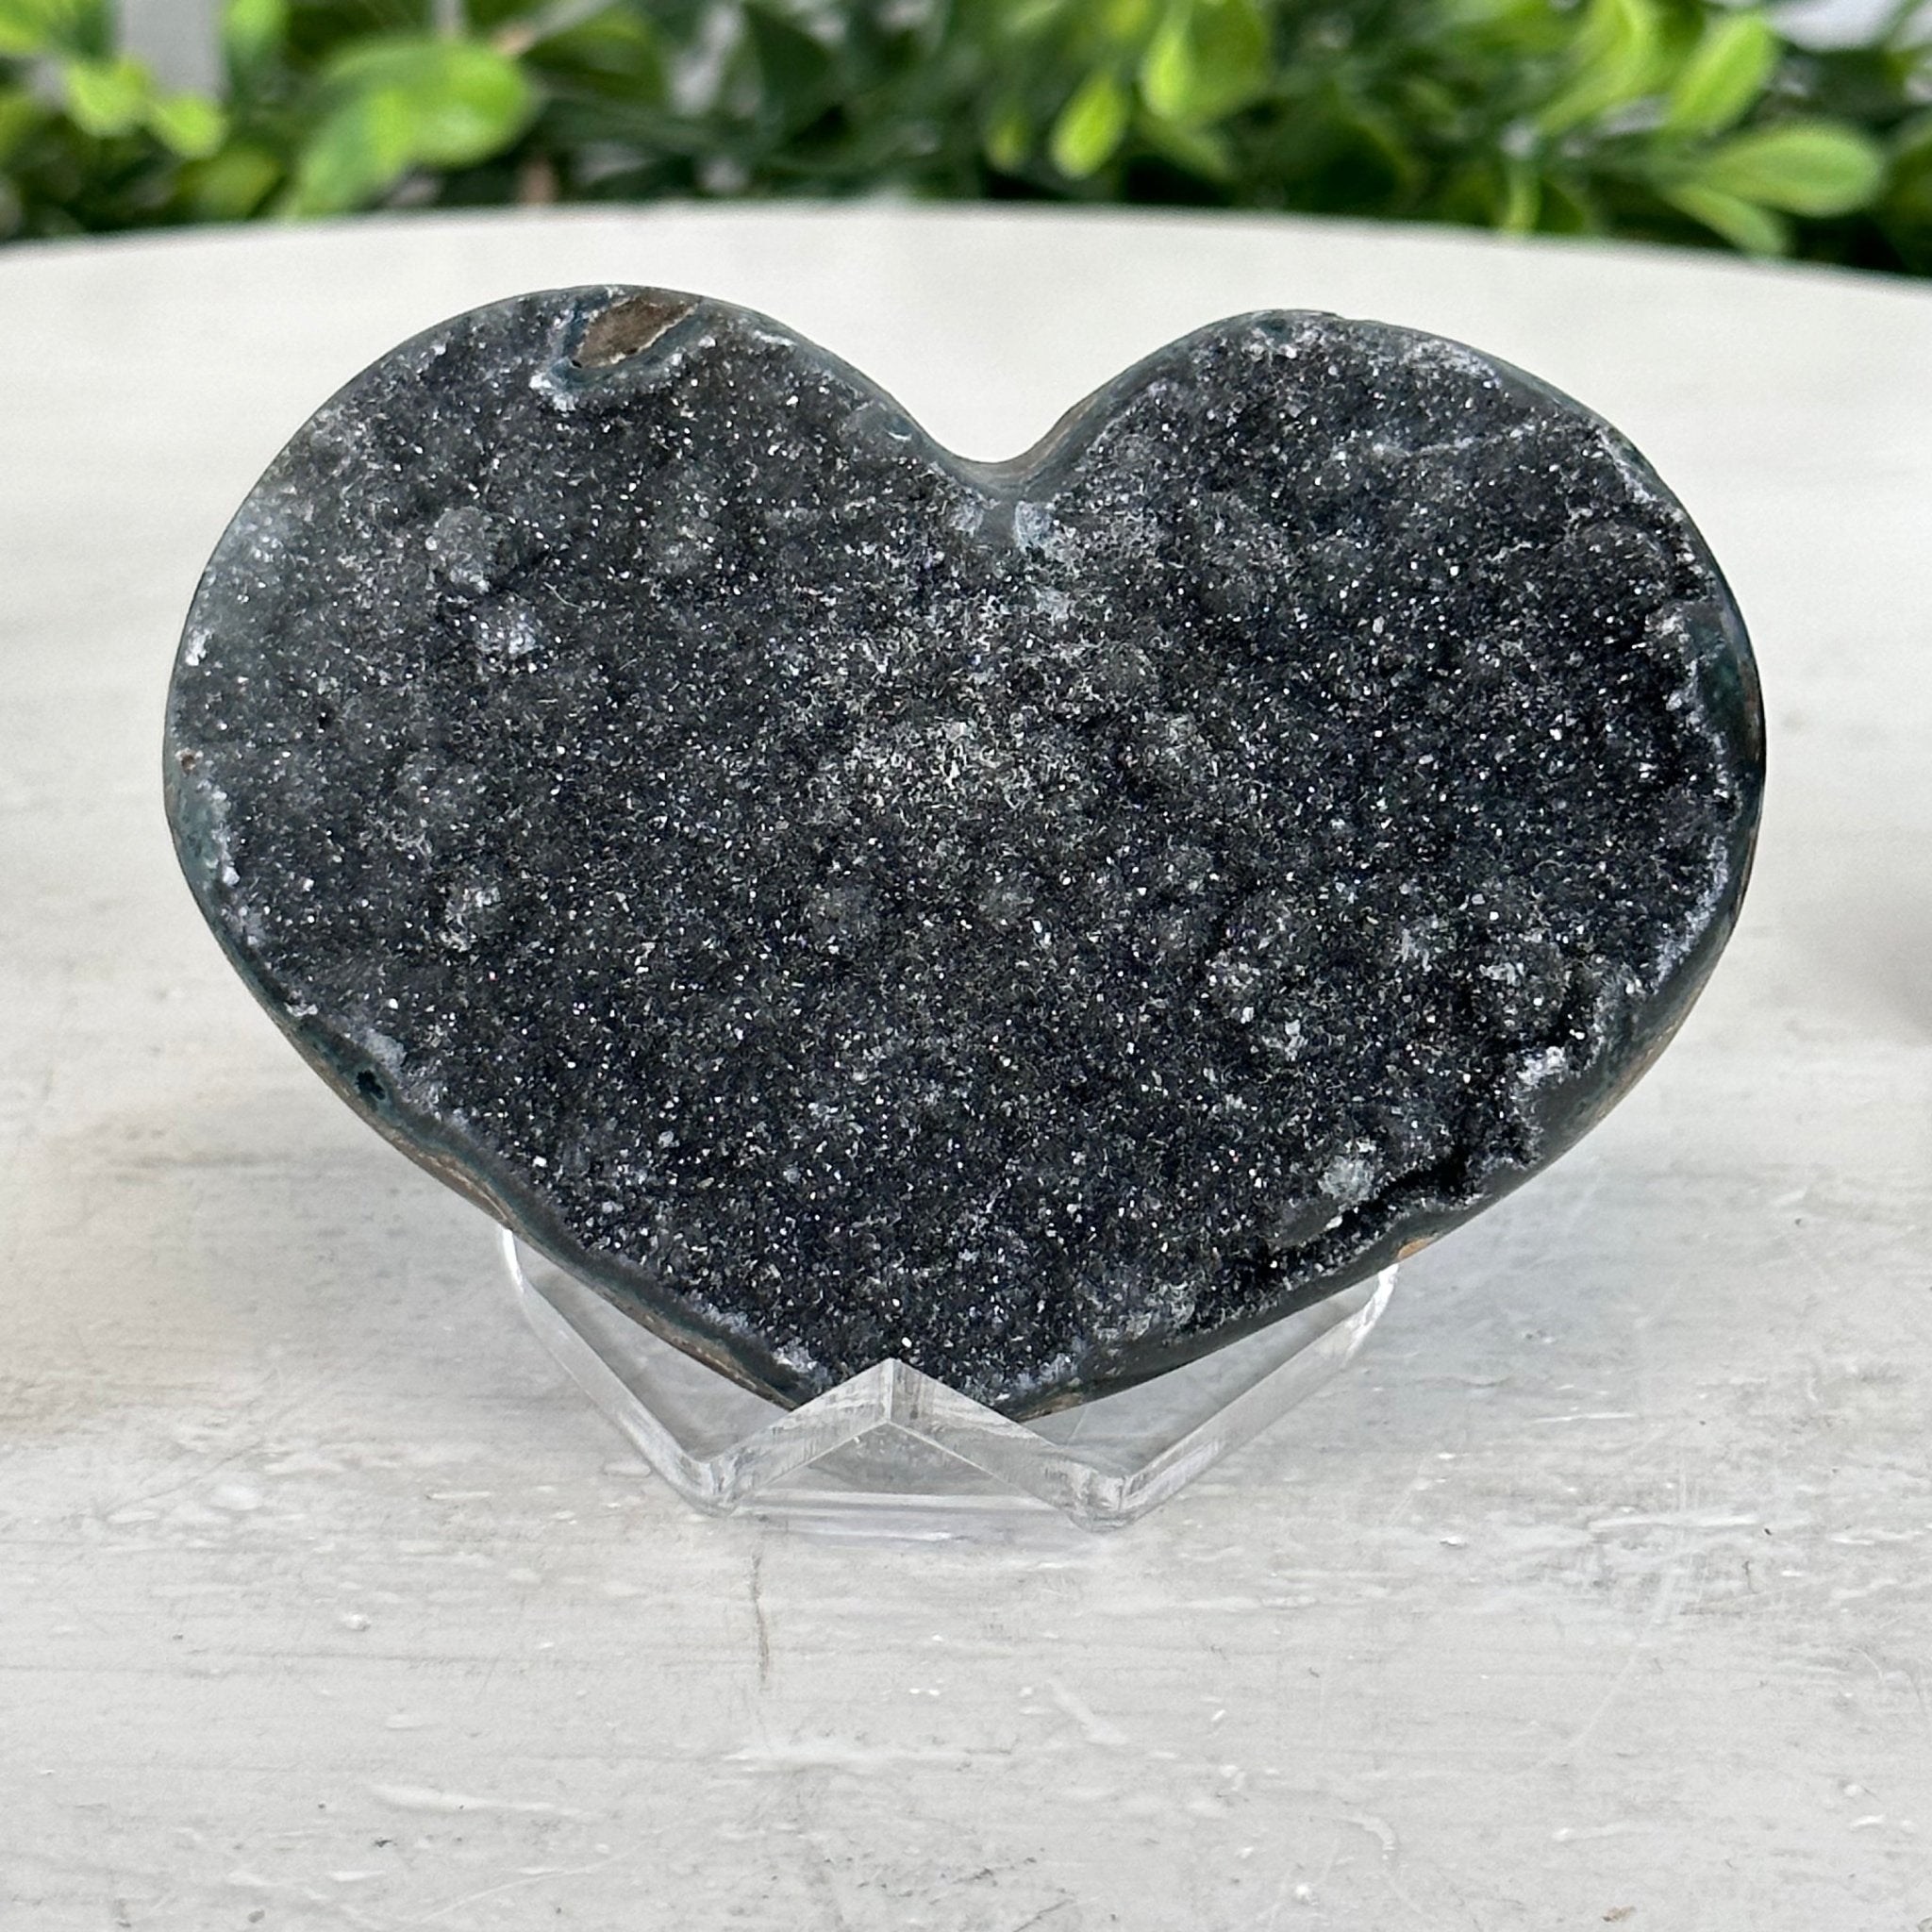 Extra Quality Amethyst Heart Geode on an Acrylic Stand, 0.34 lbs & 2.25" Tall #5462-0028 by Brazil Gems - Brazil GemsBrazil GemsExtra Quality Amethyst Heart Geode on an Acrylic Stand, 0.34 lbs & 2.25" Tall #5462-0028 by Brazil GemsHearts5462-0028